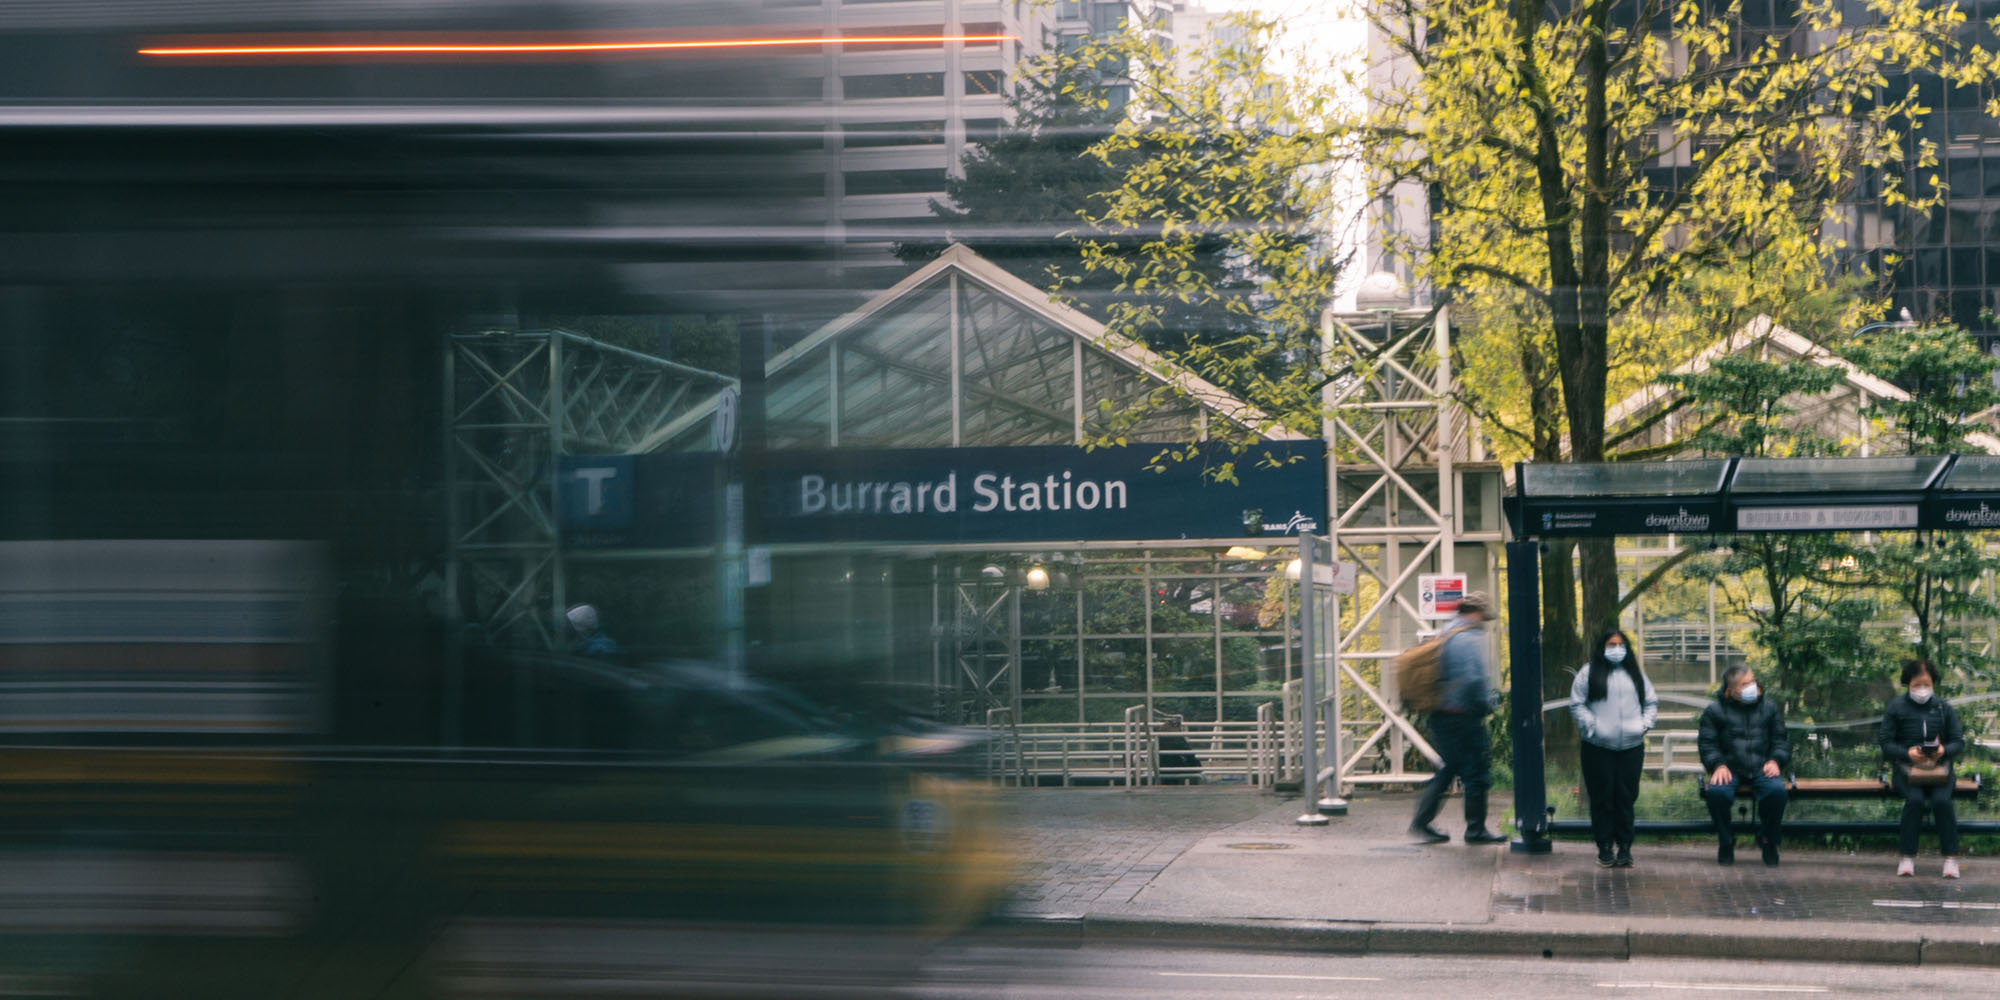 A bus drives by the entrance to Burrard Station